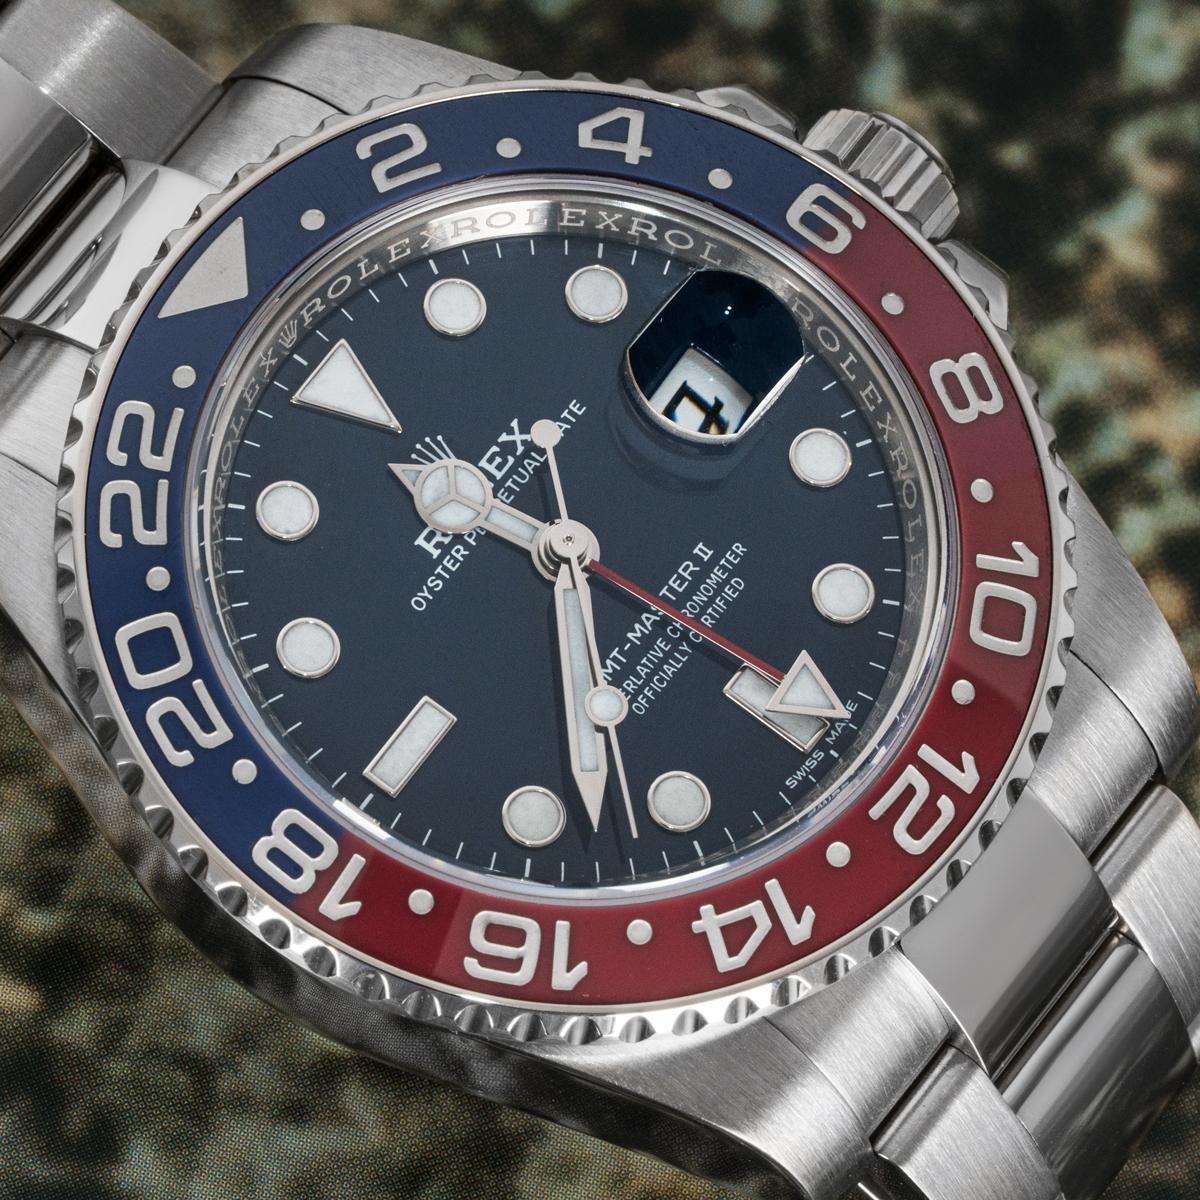 A GMT-Master II Pepsi by Rolex in white gold. Featuring a blue dial, date and red time zone hand. The blue and red bidirectional rotatable bezel features a 24-hour display. Equipped with an Oyster bracelet that comes together with an Oysterlock